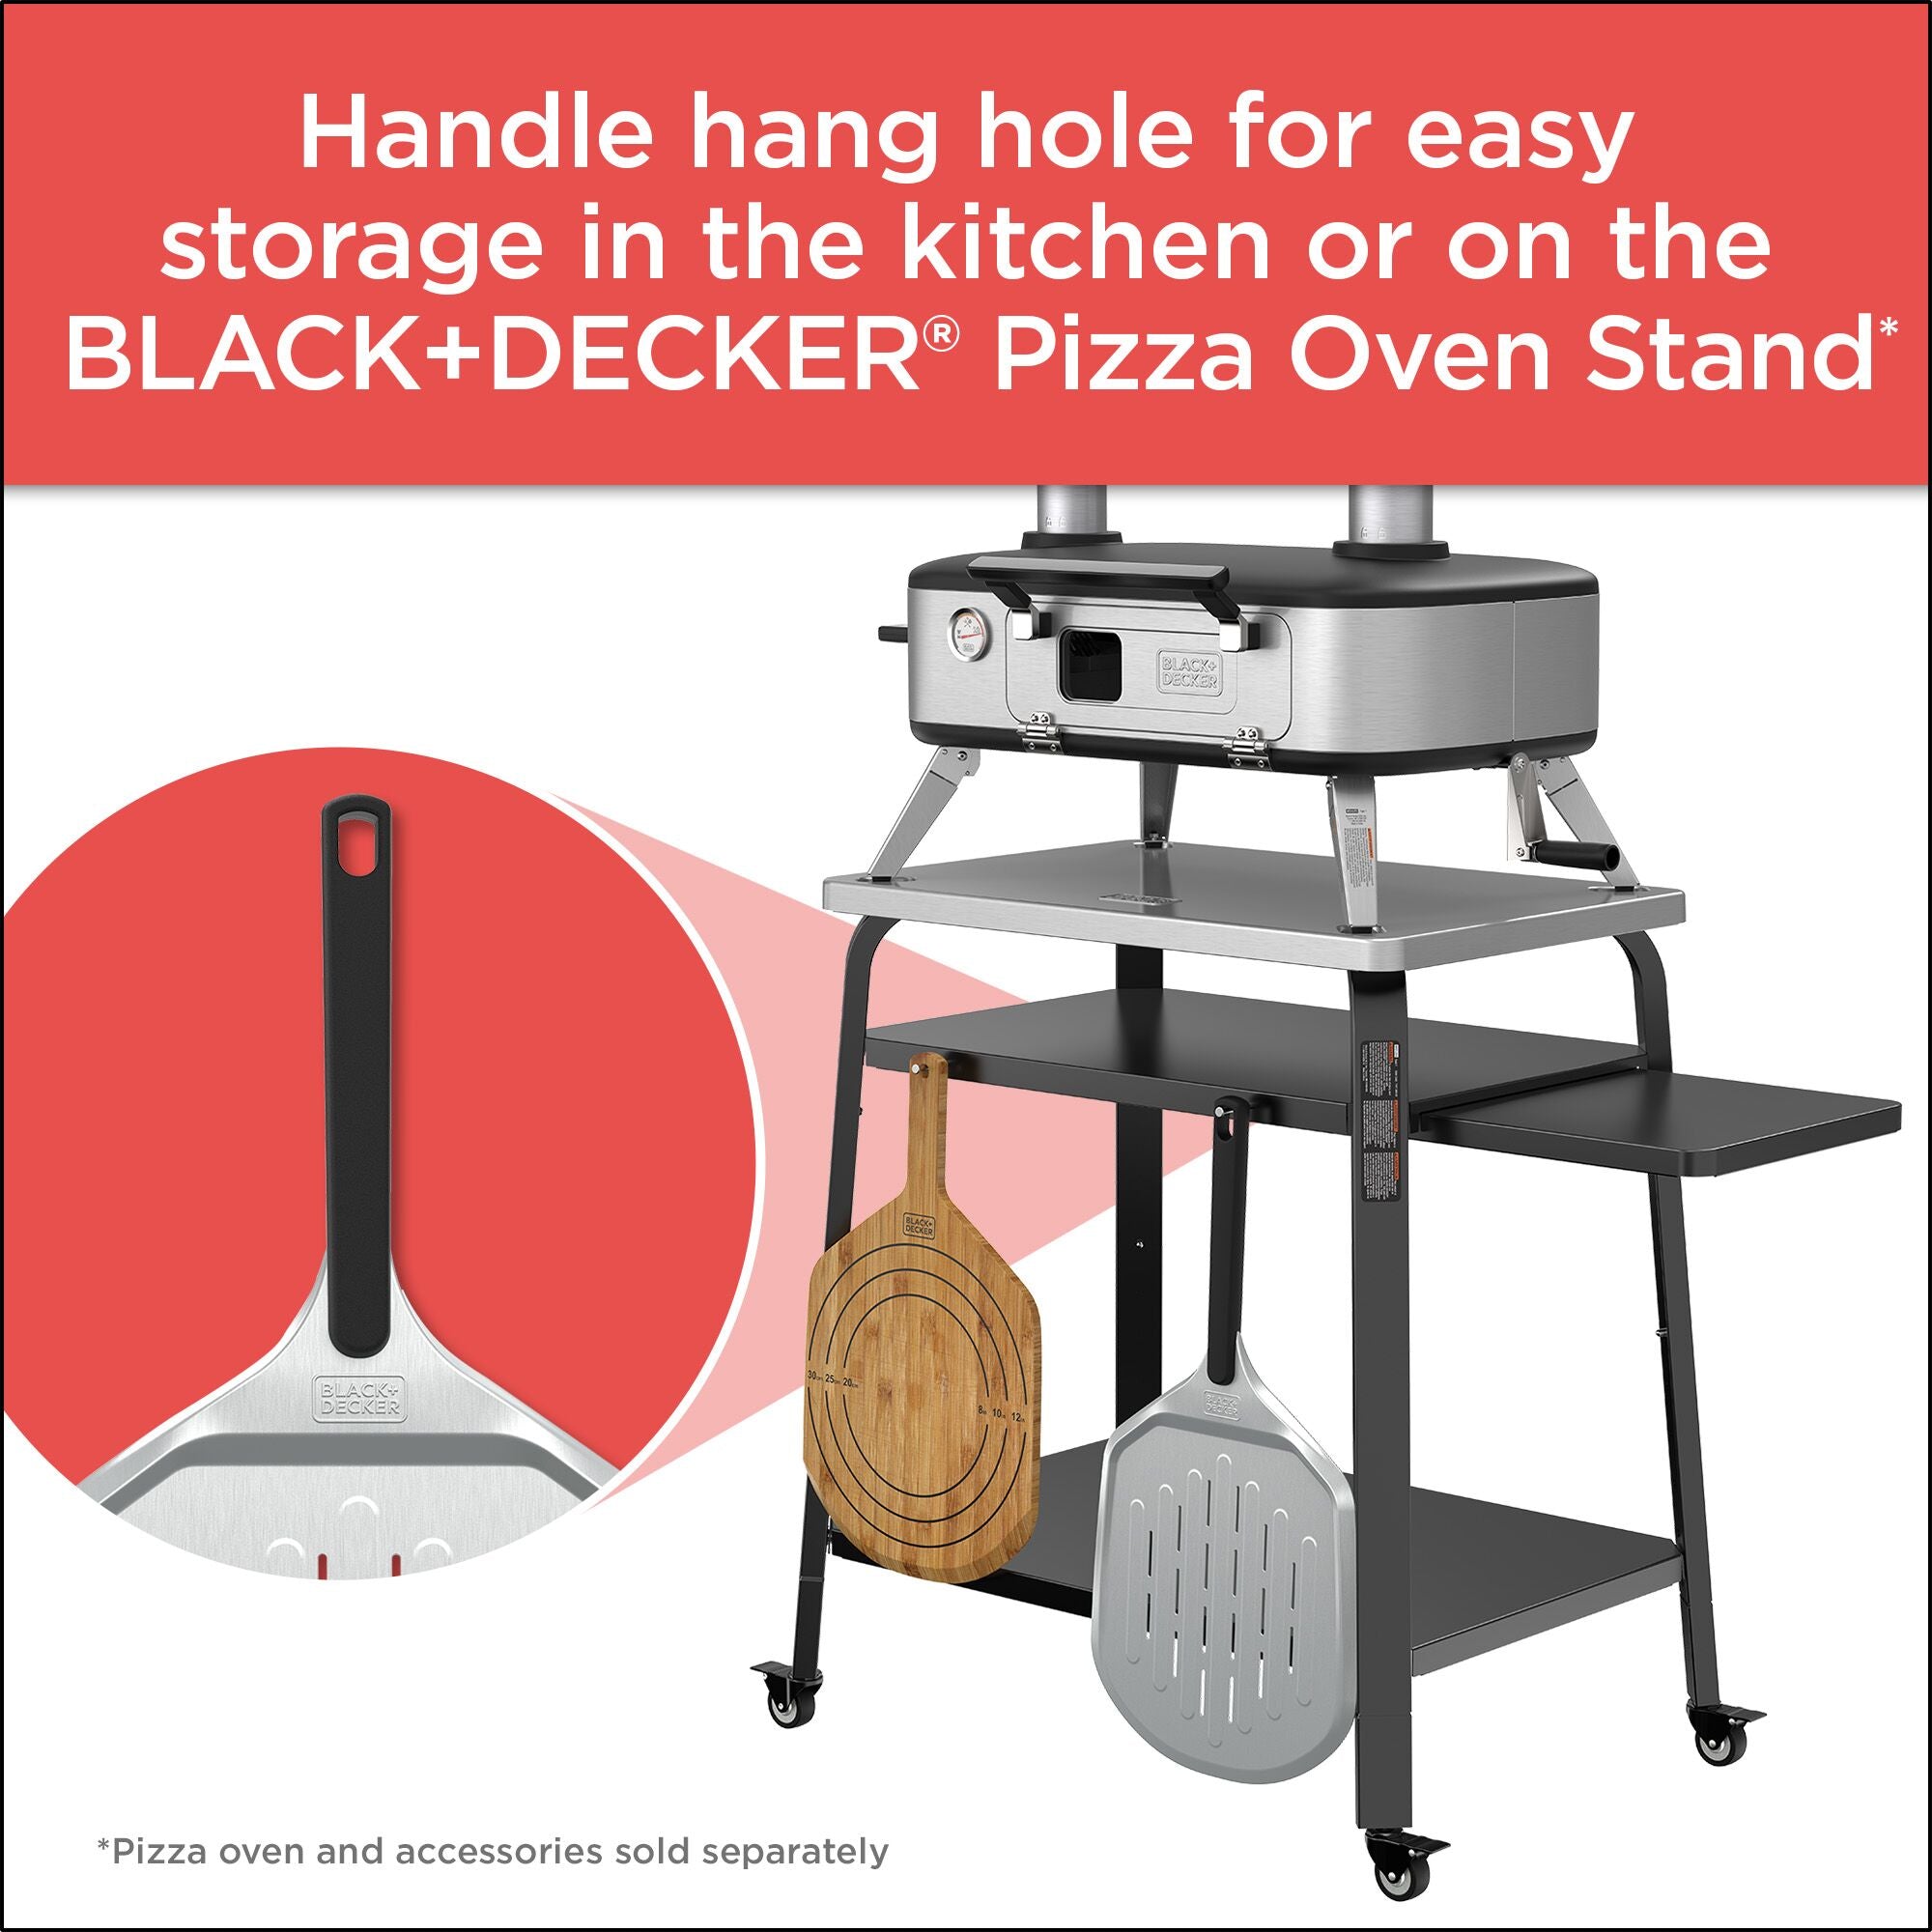 Handle hang hole for easy storage on the BLACK+DECKER pizza oven stand